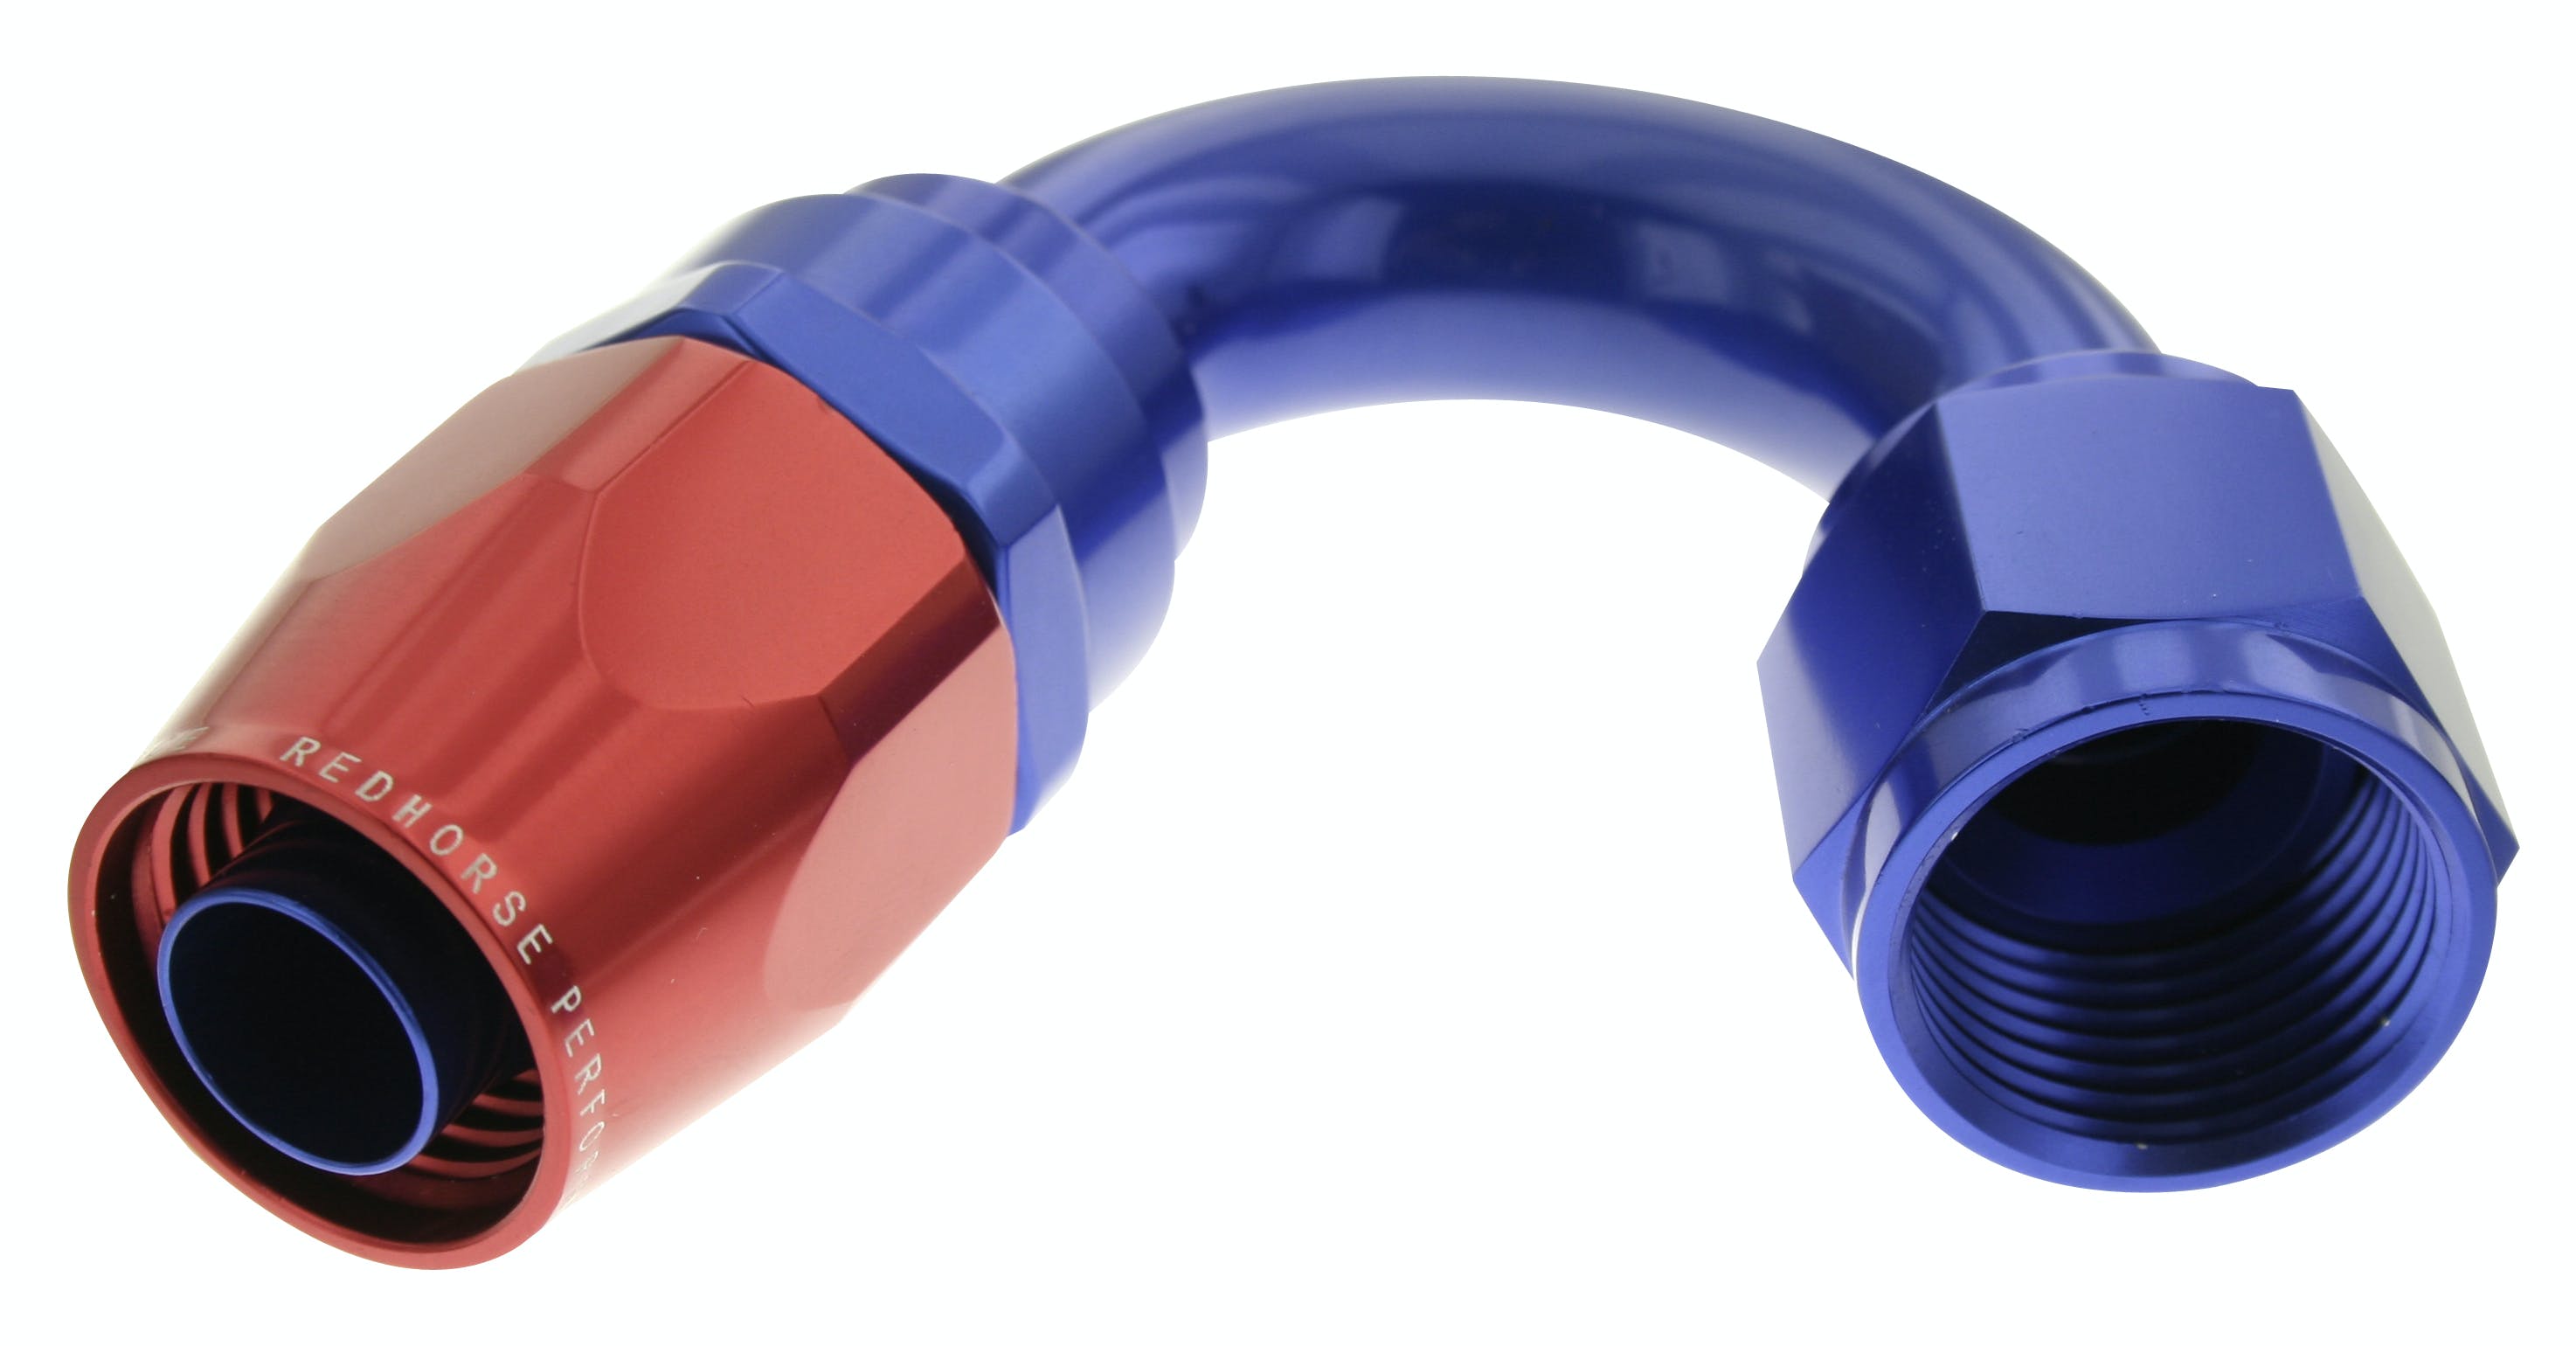 Redhorse Performance 1150-08-1 -08 150 degree Female Aluminum Hose End - red and blue